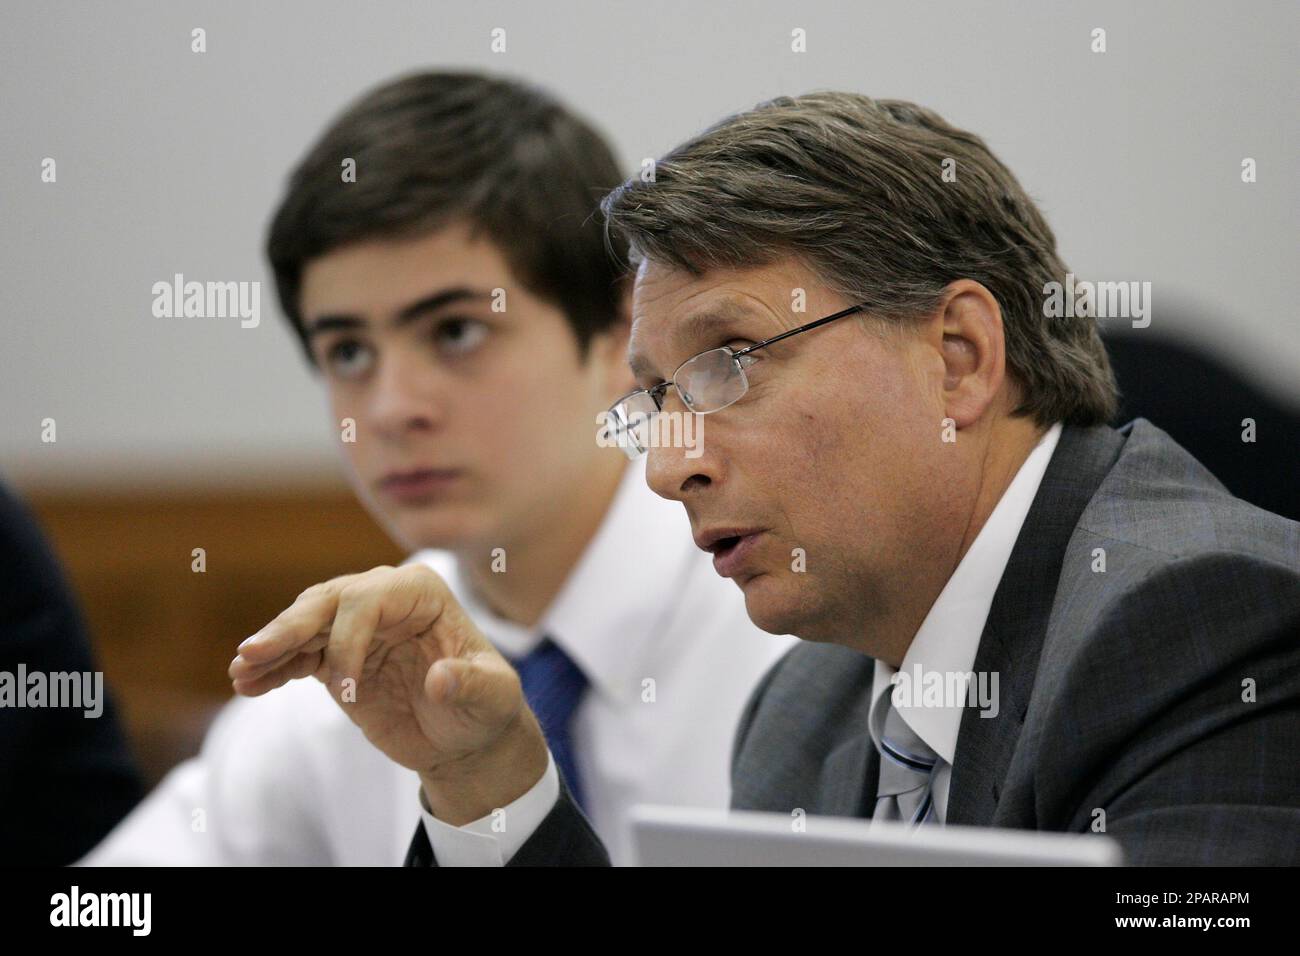 Defendant Jean Pierre Orlewicz, 17, of Plymouth Township, Mich. left,  listens as his attorney James C. Thomas speaks during a preliminary  examination, Friday, Nov. 30, 2007 in Plymouth, Mich. Canton High School